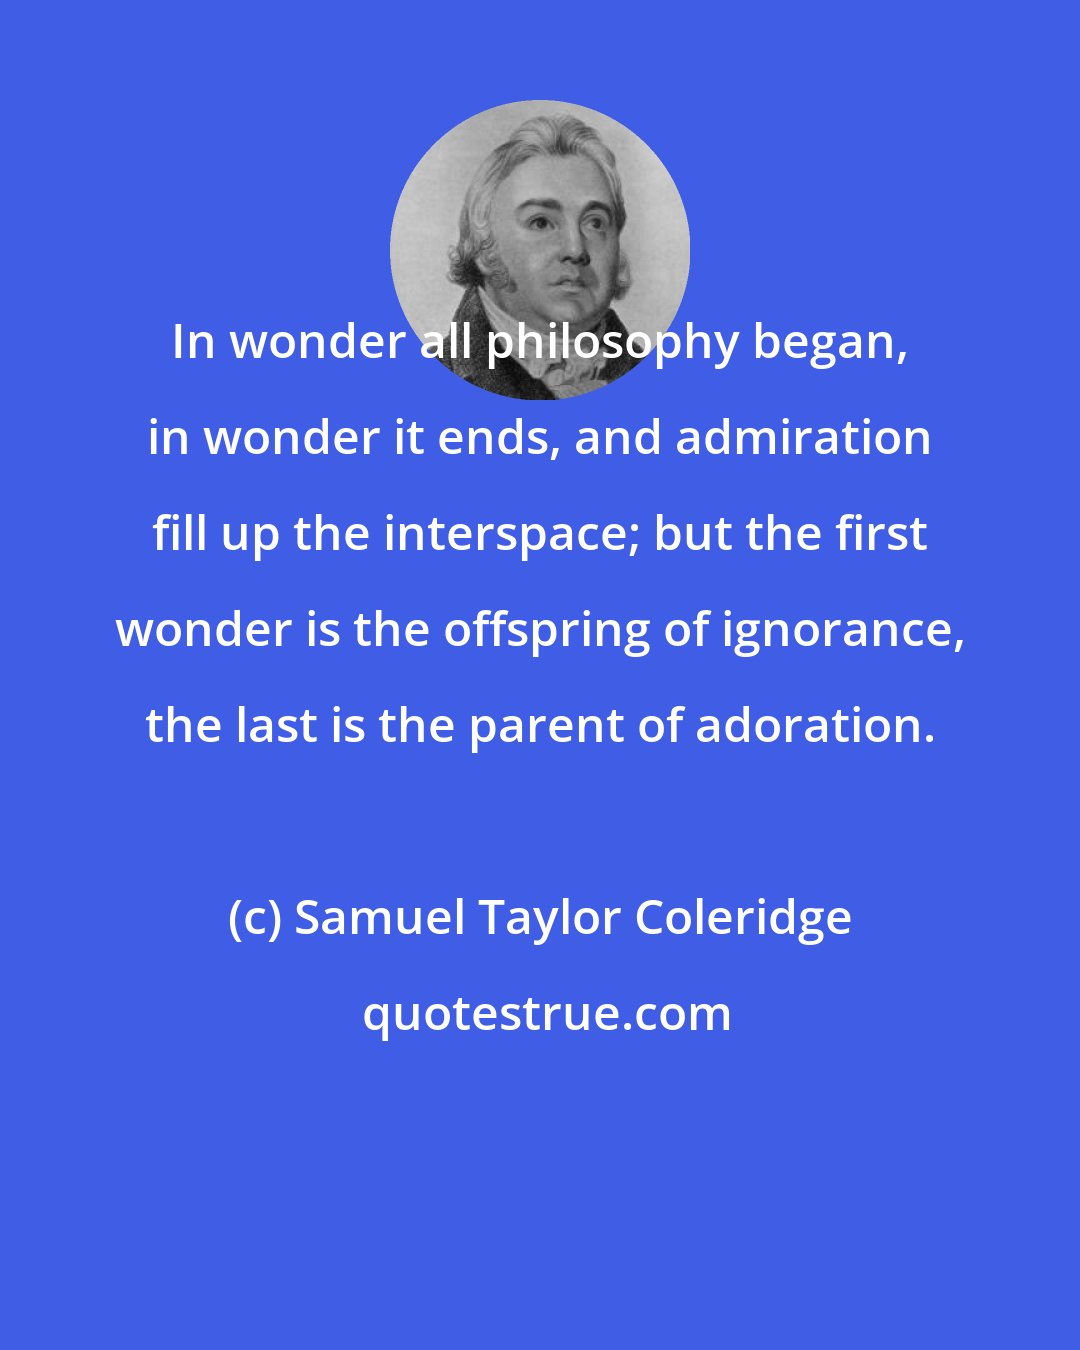 Samuel Taylor Coleridge: In wonder all philosophy began, in wonder it ends, and admiration fill up the interspace; but the first wonder is the offspring of ignorance, the last is the parent of adoration.